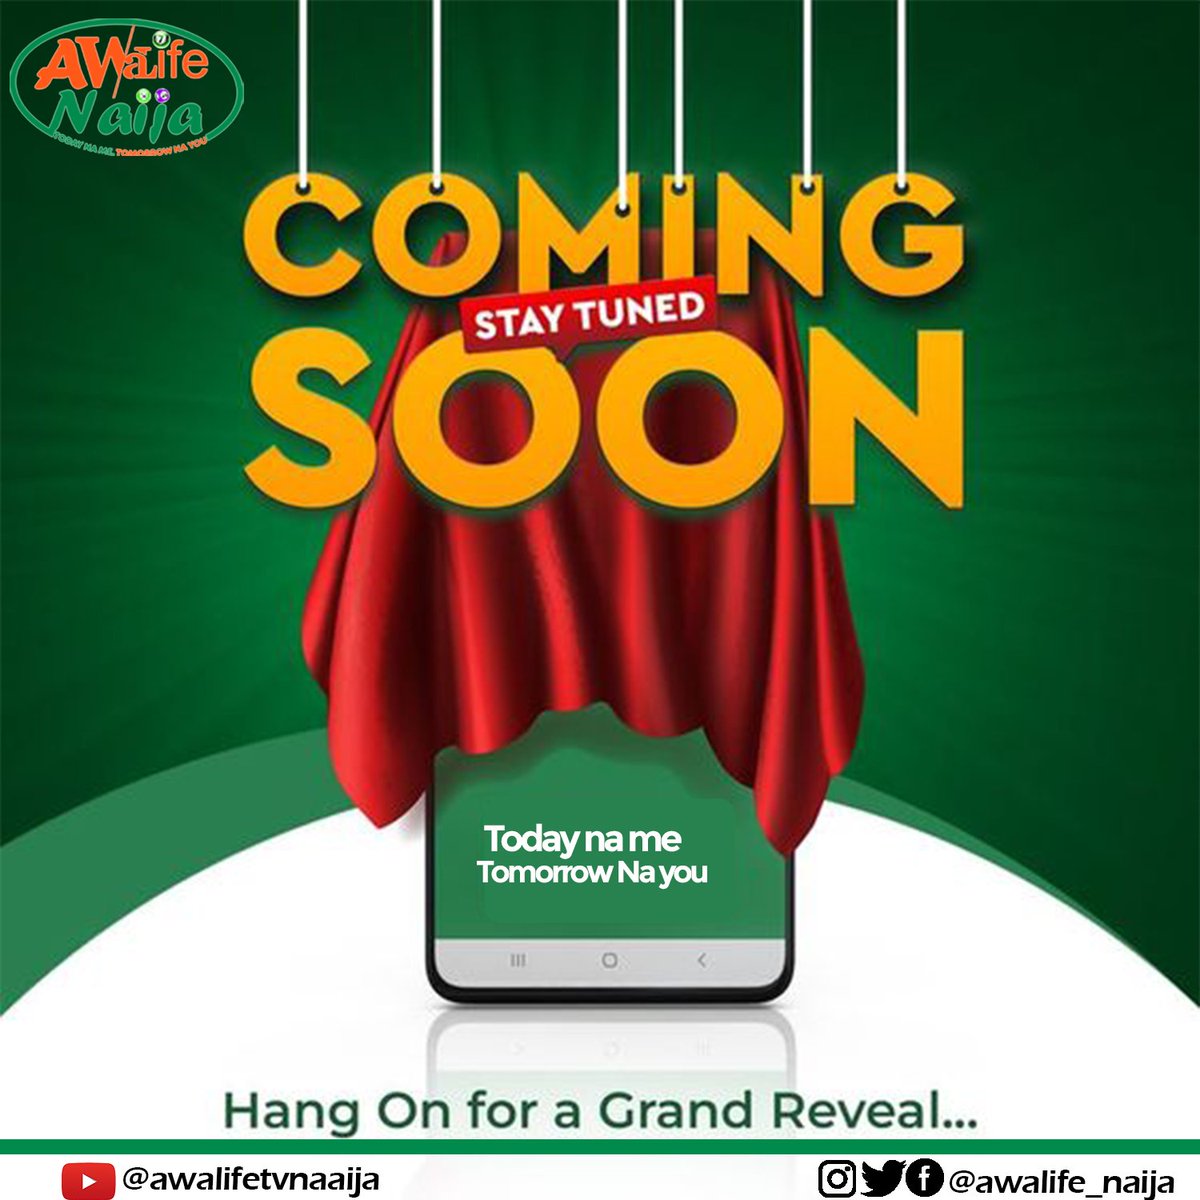 The time has almost come to share it with all of you! Something BIG is on the horizon and we couldn't be more thrilled to reveal it soon. Coming soon .........
#awalifenaija #jackpot #SomethingBigIsComing #StayTuned #ExcitingNews